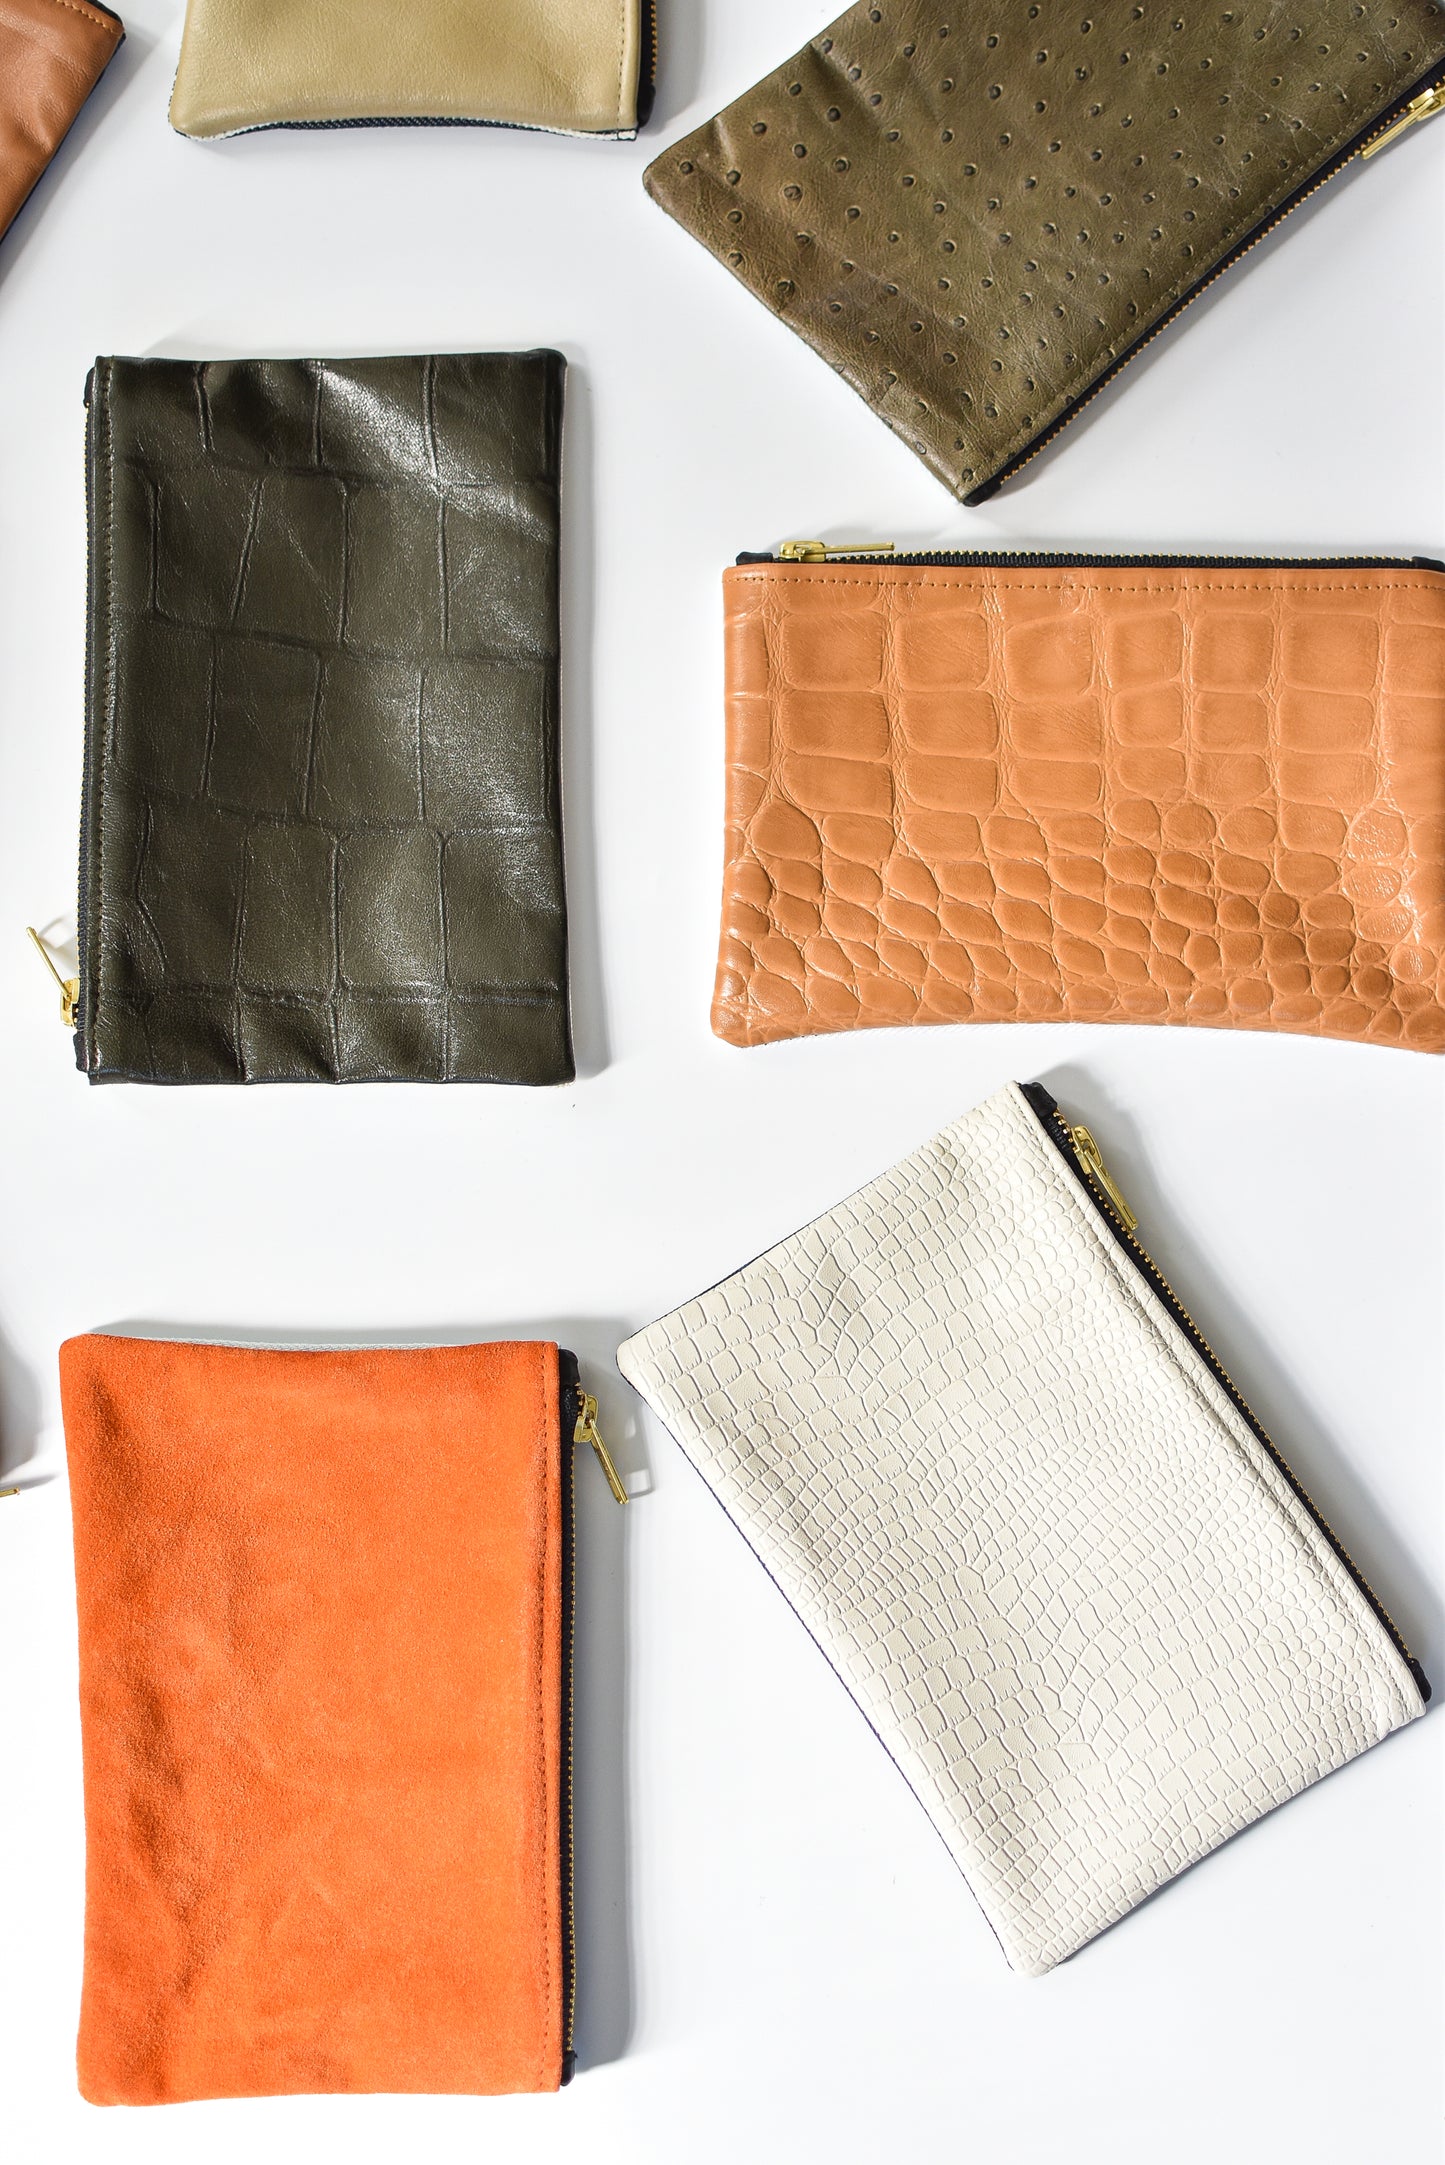 Collection of small limited edition leather and denim pouches from Anya & Niki. 